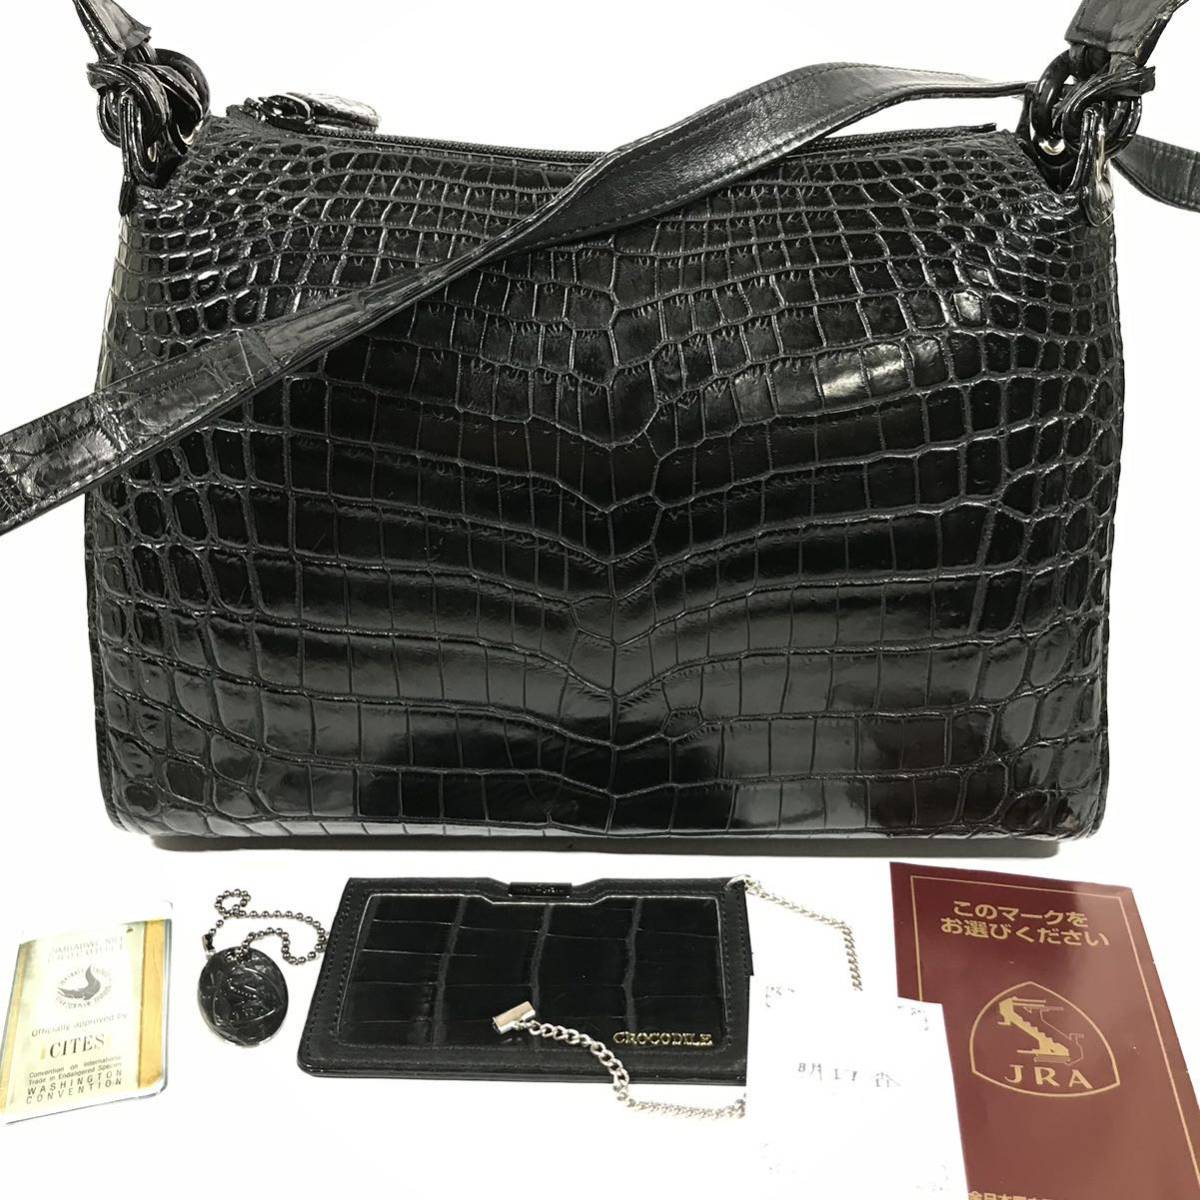 [ Akira day .] genuine article ASUKA crocodile JRA shoulder bag diagonal .. one shoulder black wani leather for women lady's made in Japan card-case attaching 